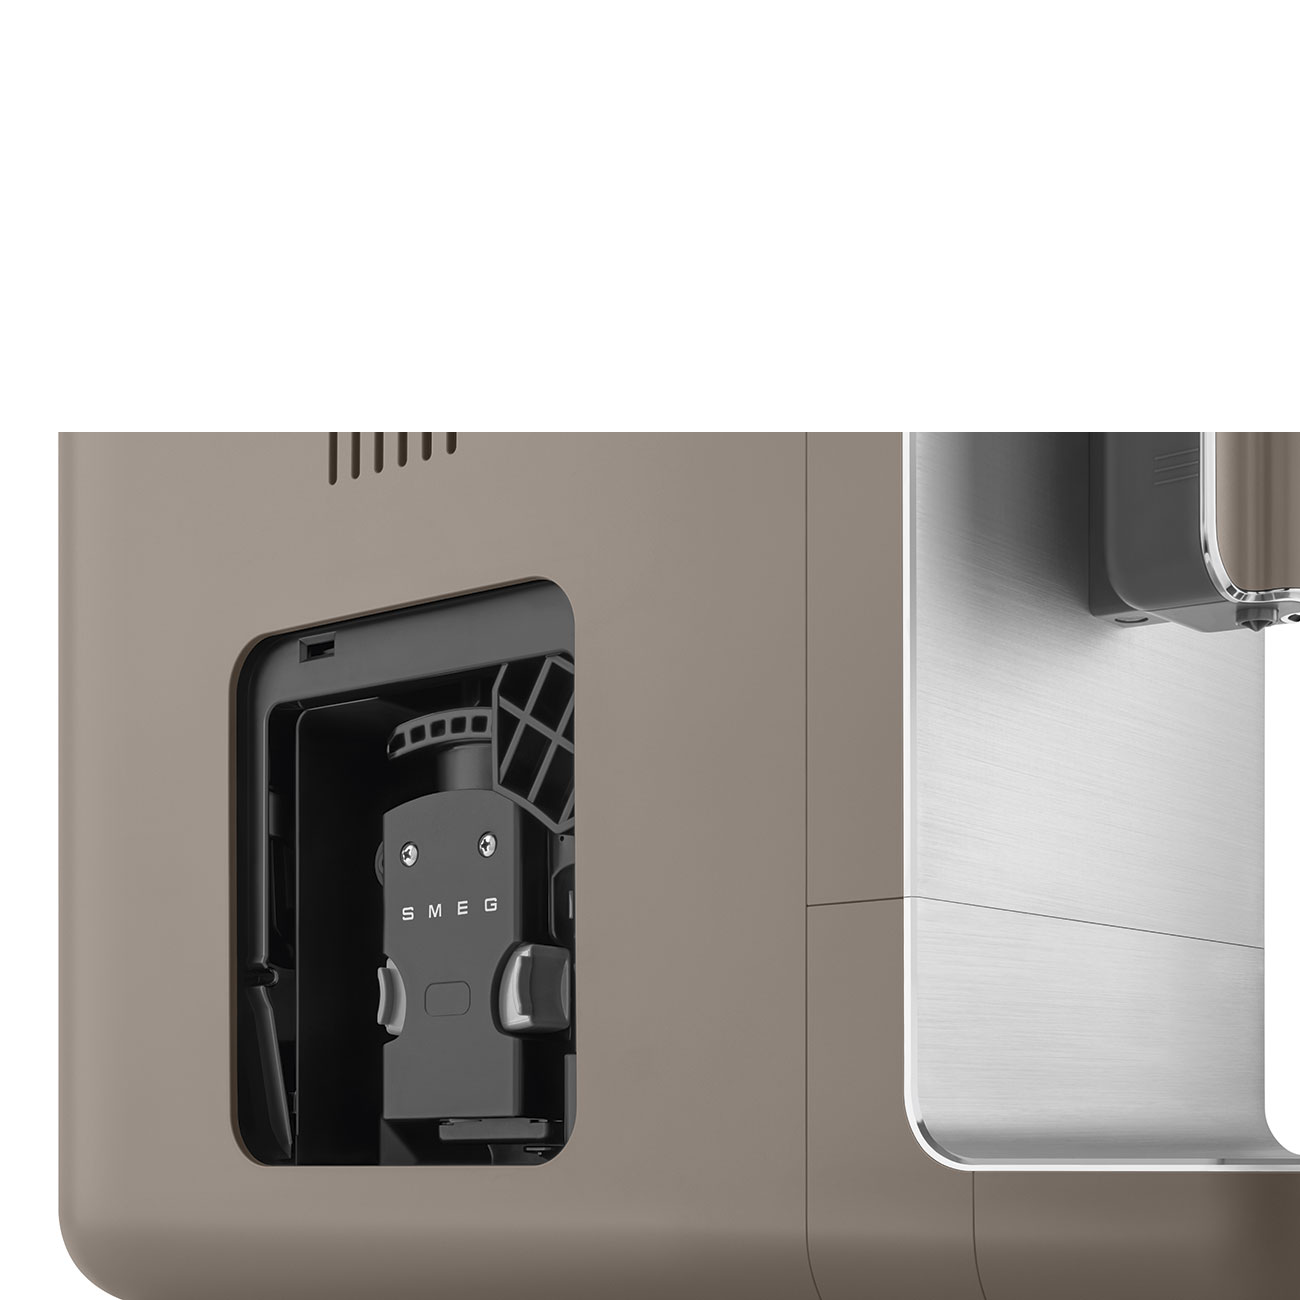 Smeg Taupe Espresso Manual Coffee Machine with Milk Forther - BCC02TPMUK_11